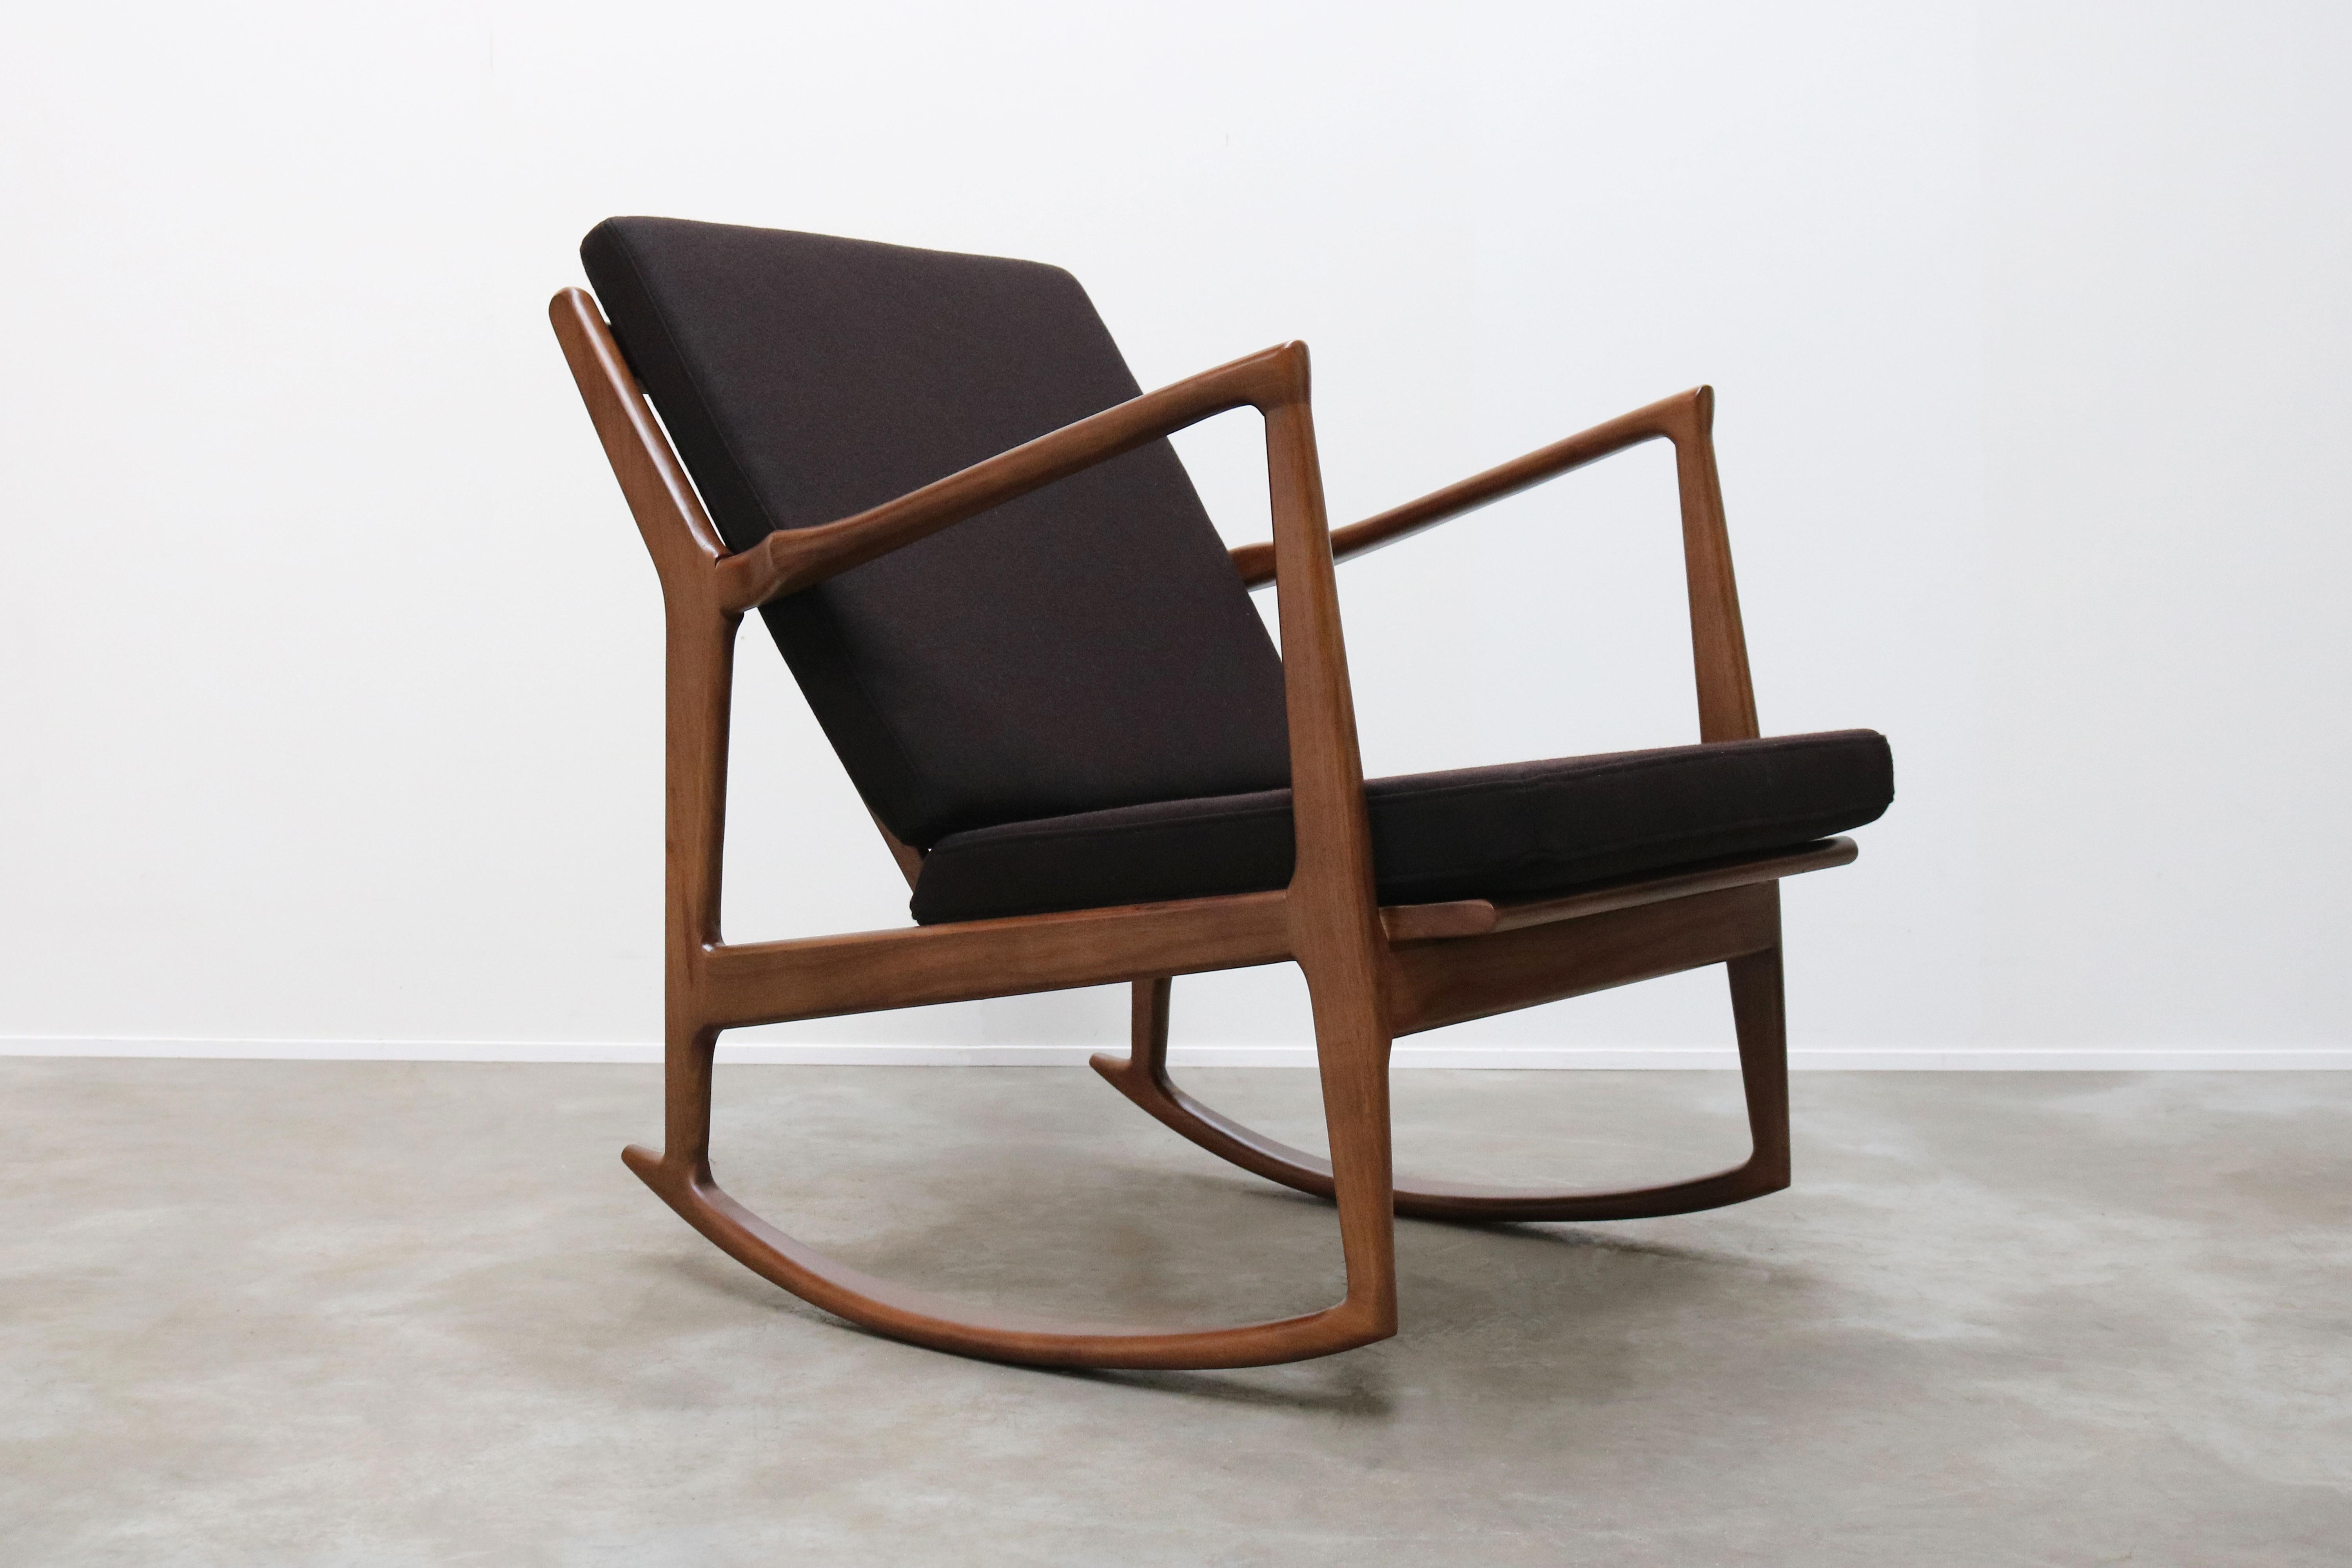 From our own workshop and design collection this gorgeous 1950 danish design style rocking chair.
Made out of solid walnut with a brown cashmere upholstery. The rocking chair looks amazing and is most comfortable
Great as a statement piece alone